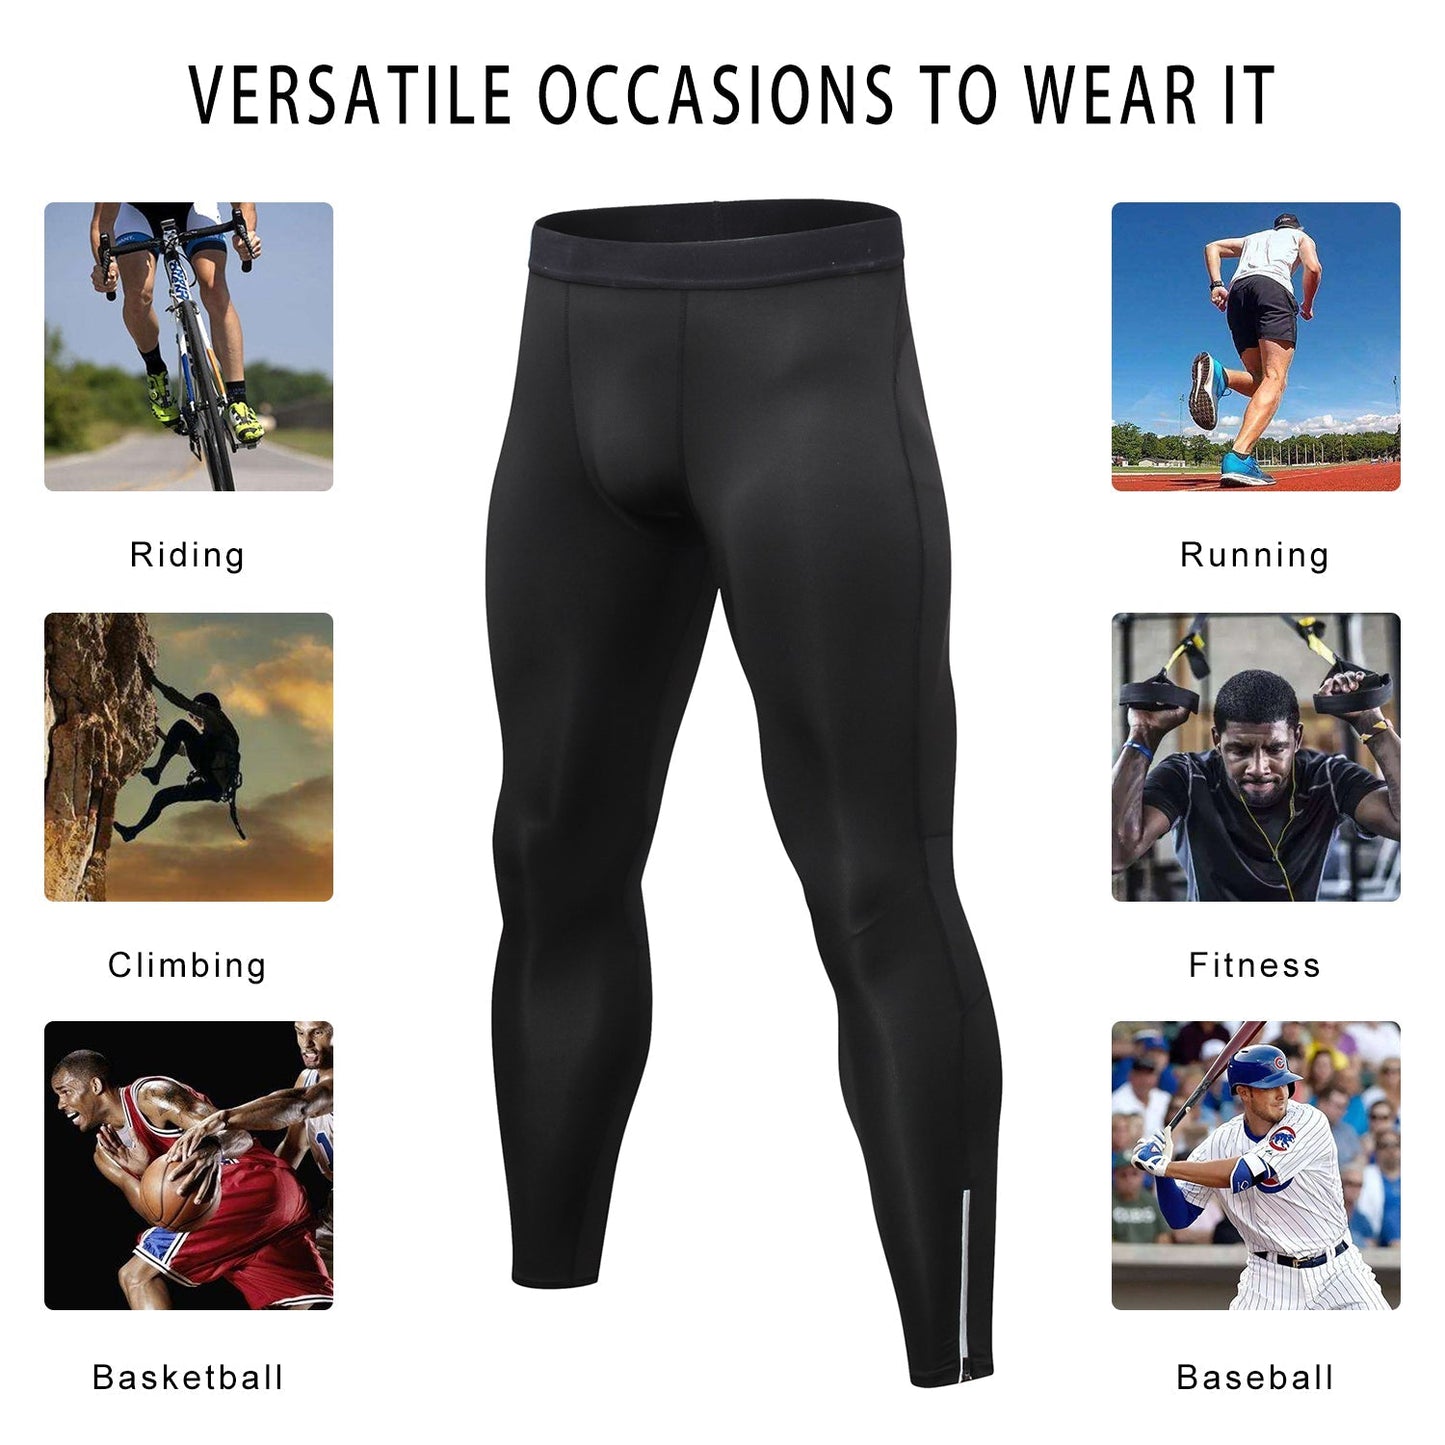 Mens Compression Pants Waist Elastic Ankle Zip Leggings Running Workout Sports Yoga Tights Athletic Activewear Baselayer LANBAOSI